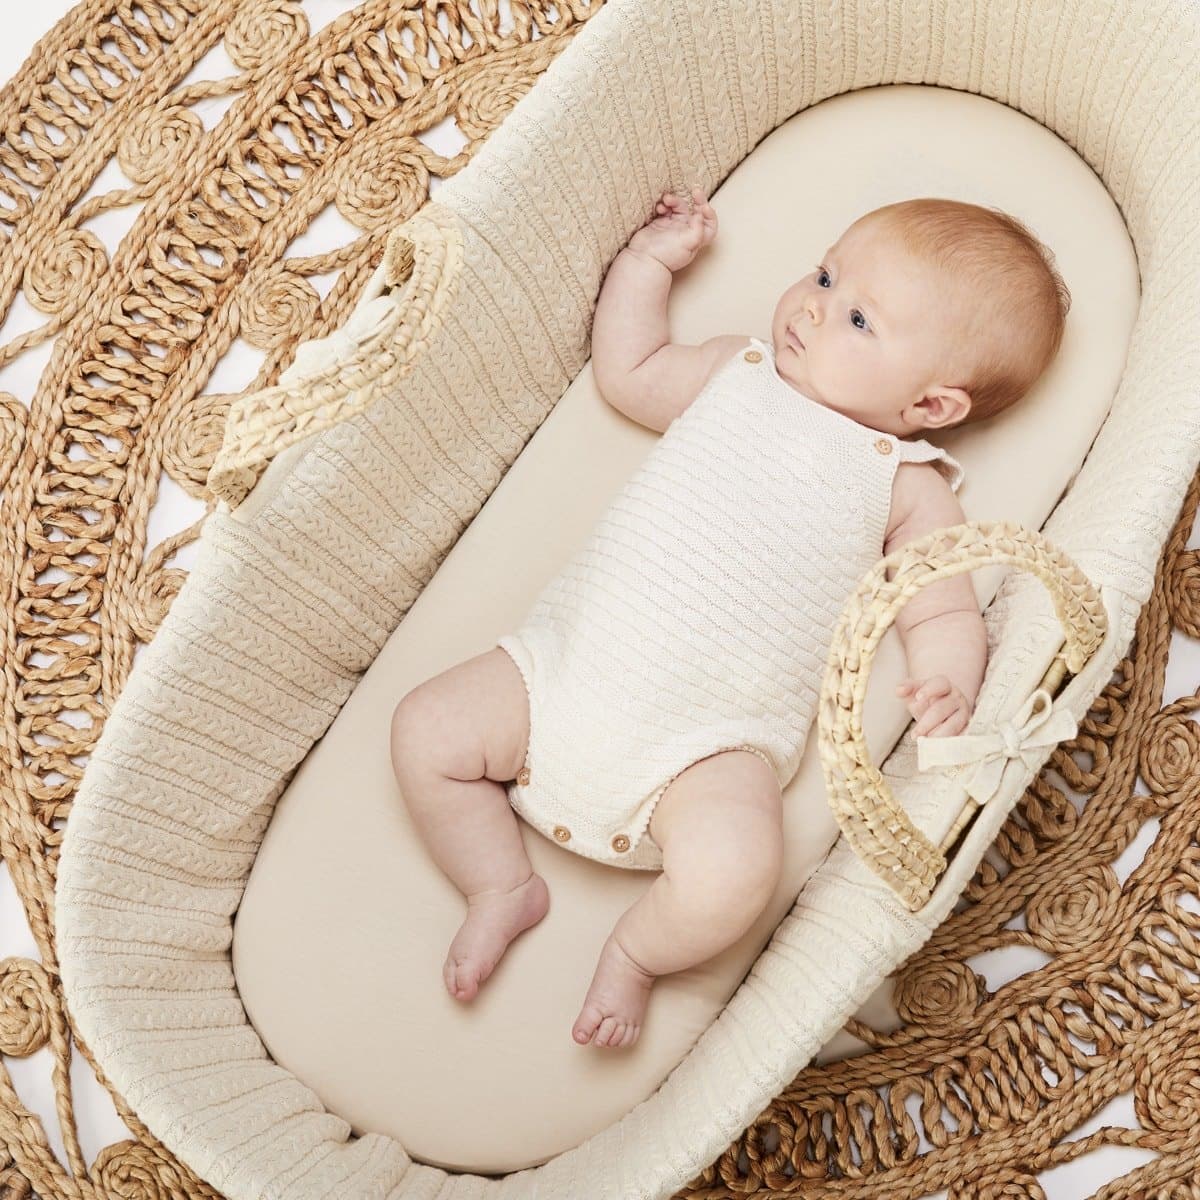 HOW TO CHOOSE A MOSES BASKET